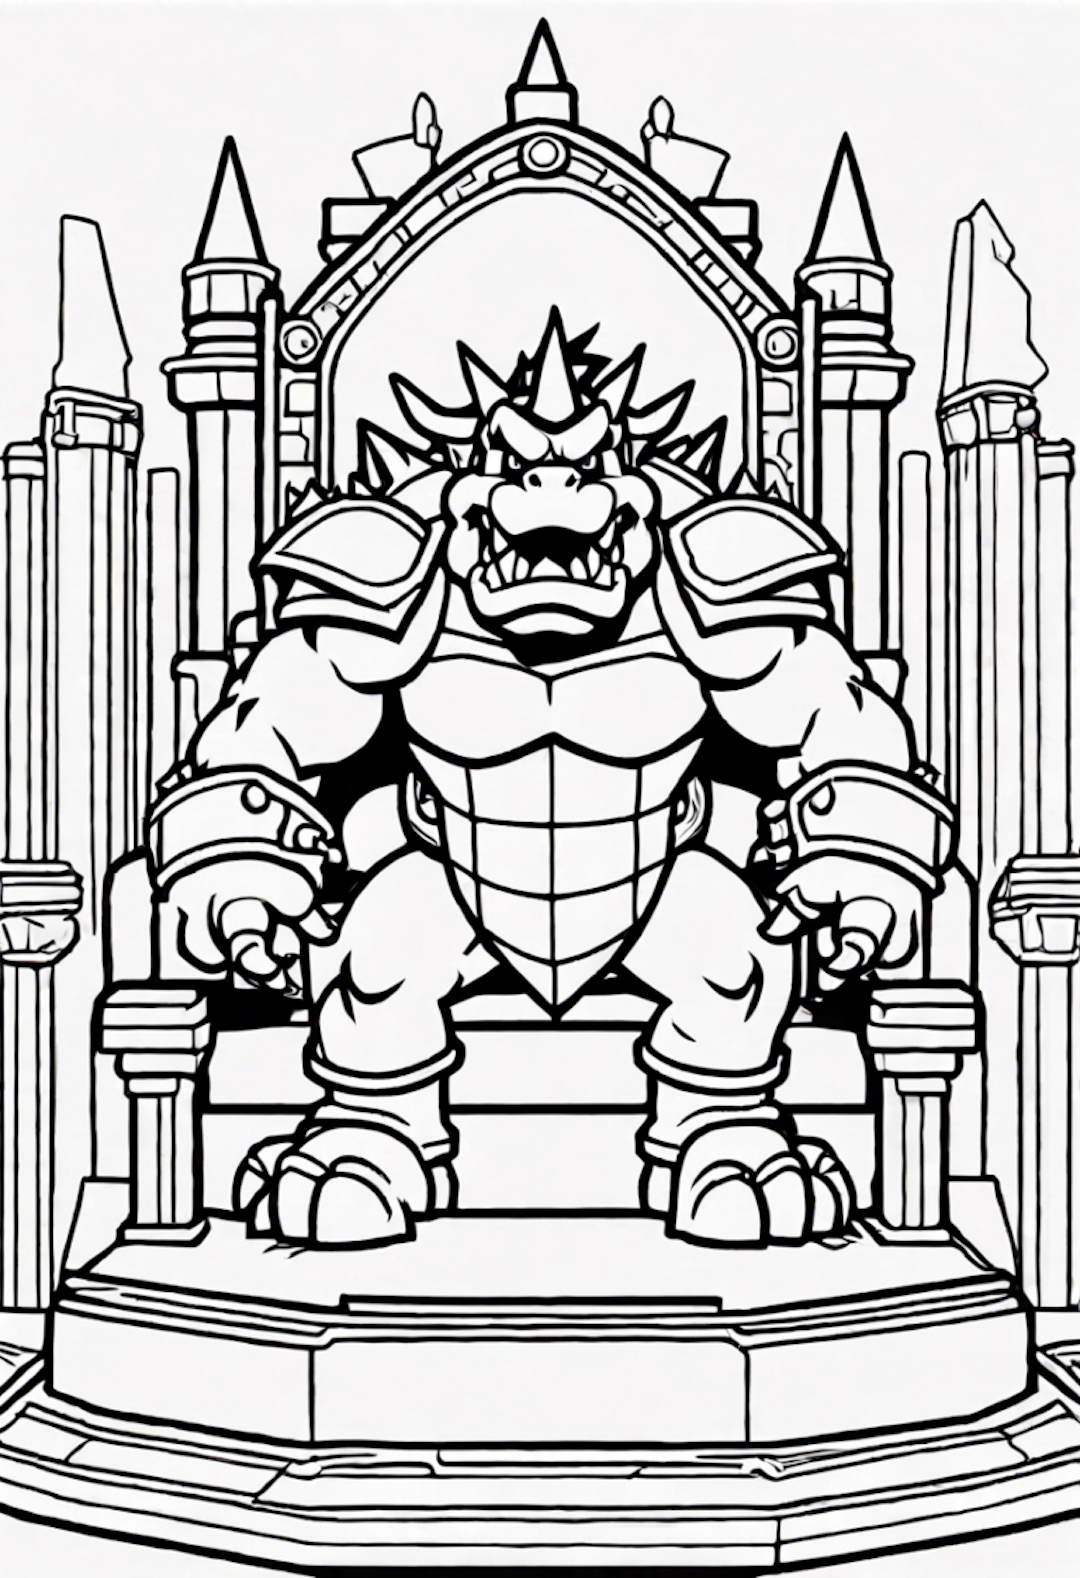 Bowser At The Bowsers Castle Throne Room coloring pages